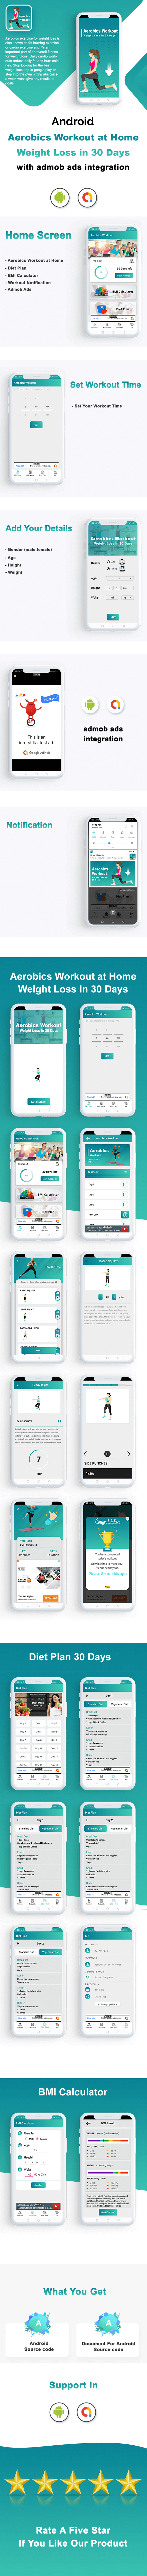 Android Office Workout App - Exercises at Your Office - 2